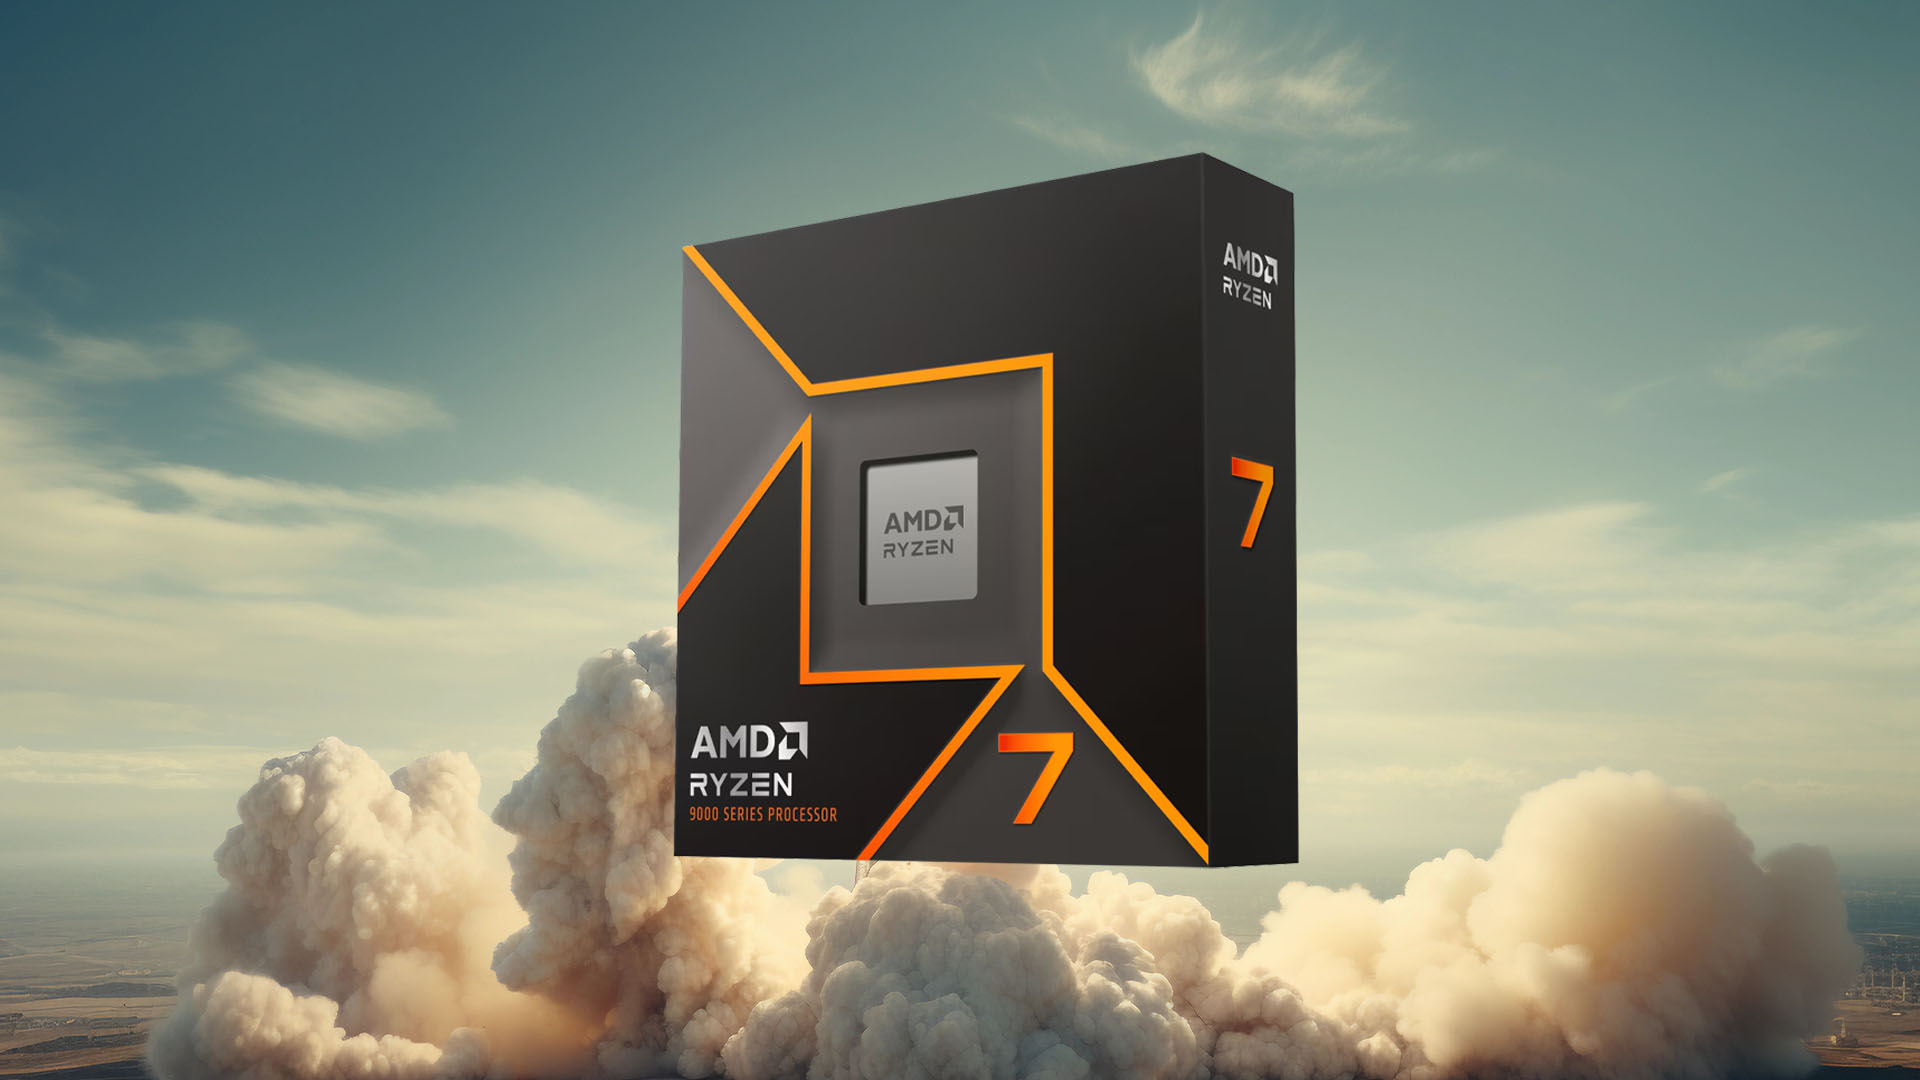 AMD’s Ryzen 9700X could get a performance boost to beat the 7800X3D